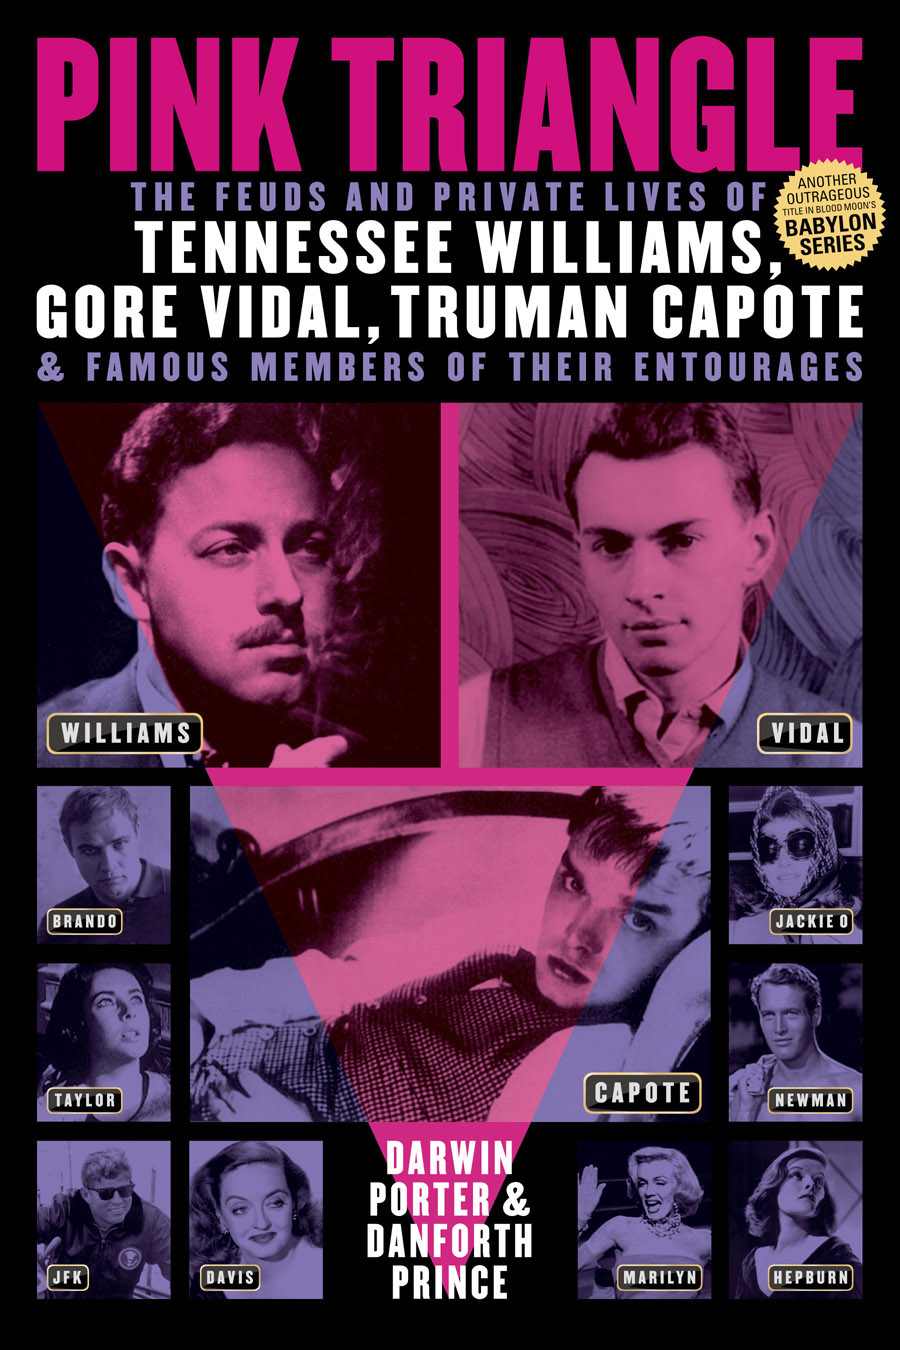 Pink Triangle: The Feuds and Private Lives of Tennessee Williams, Gore Vidal, Truman Capote, and Famous Members of Their Entourages (Blood Moon's Babylon Series) by Darwin Porter